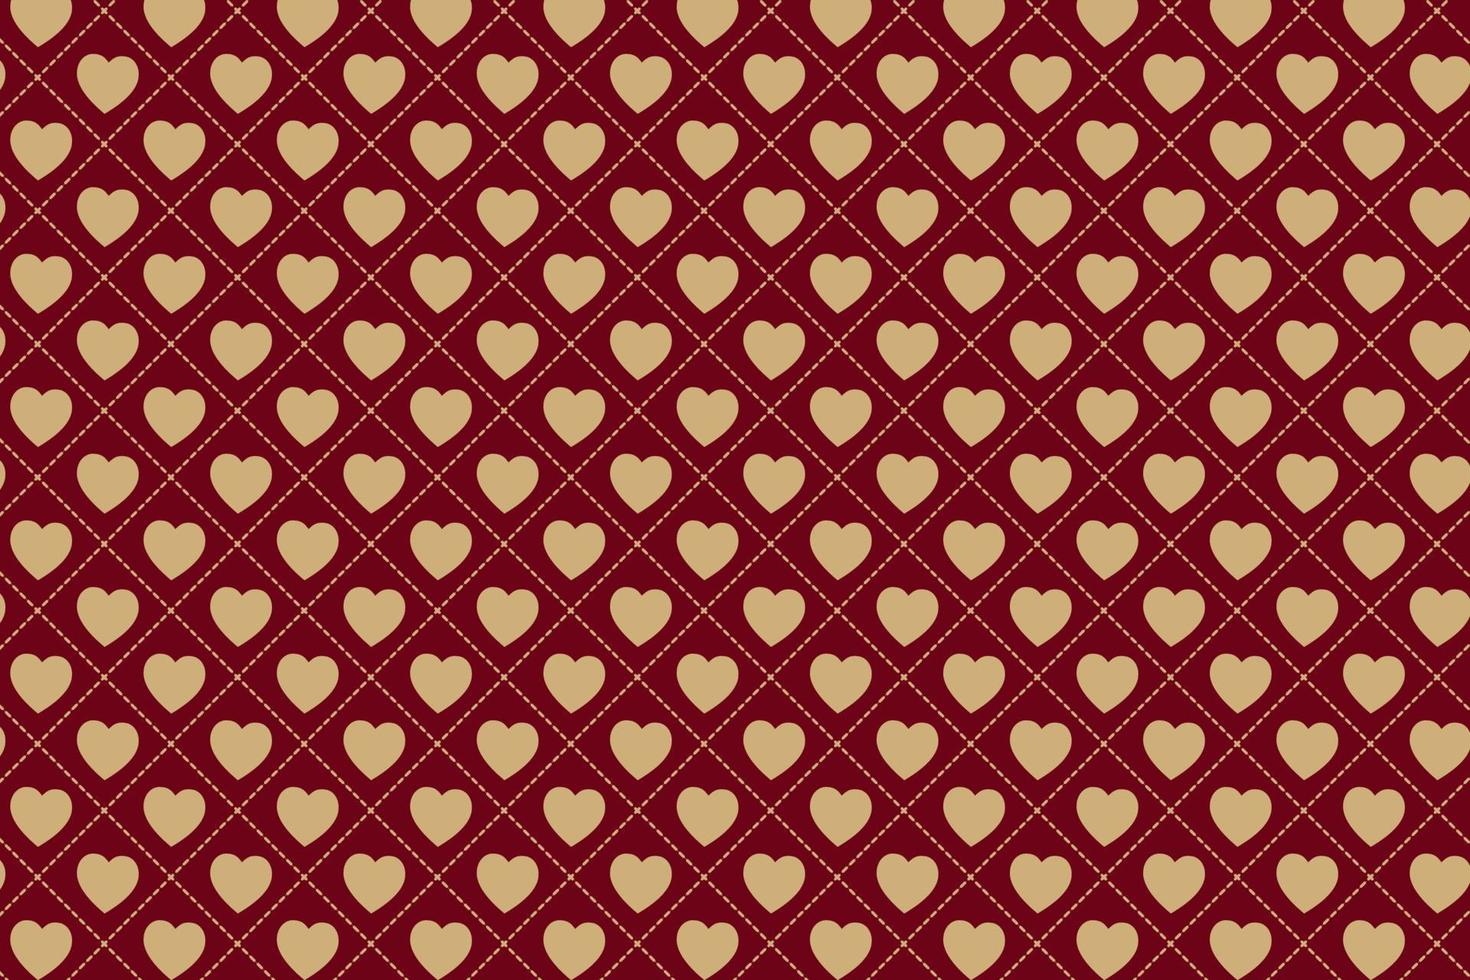 Pattern with heart shaped geometric elements in red tones with golden stripes. Abstract Background vector